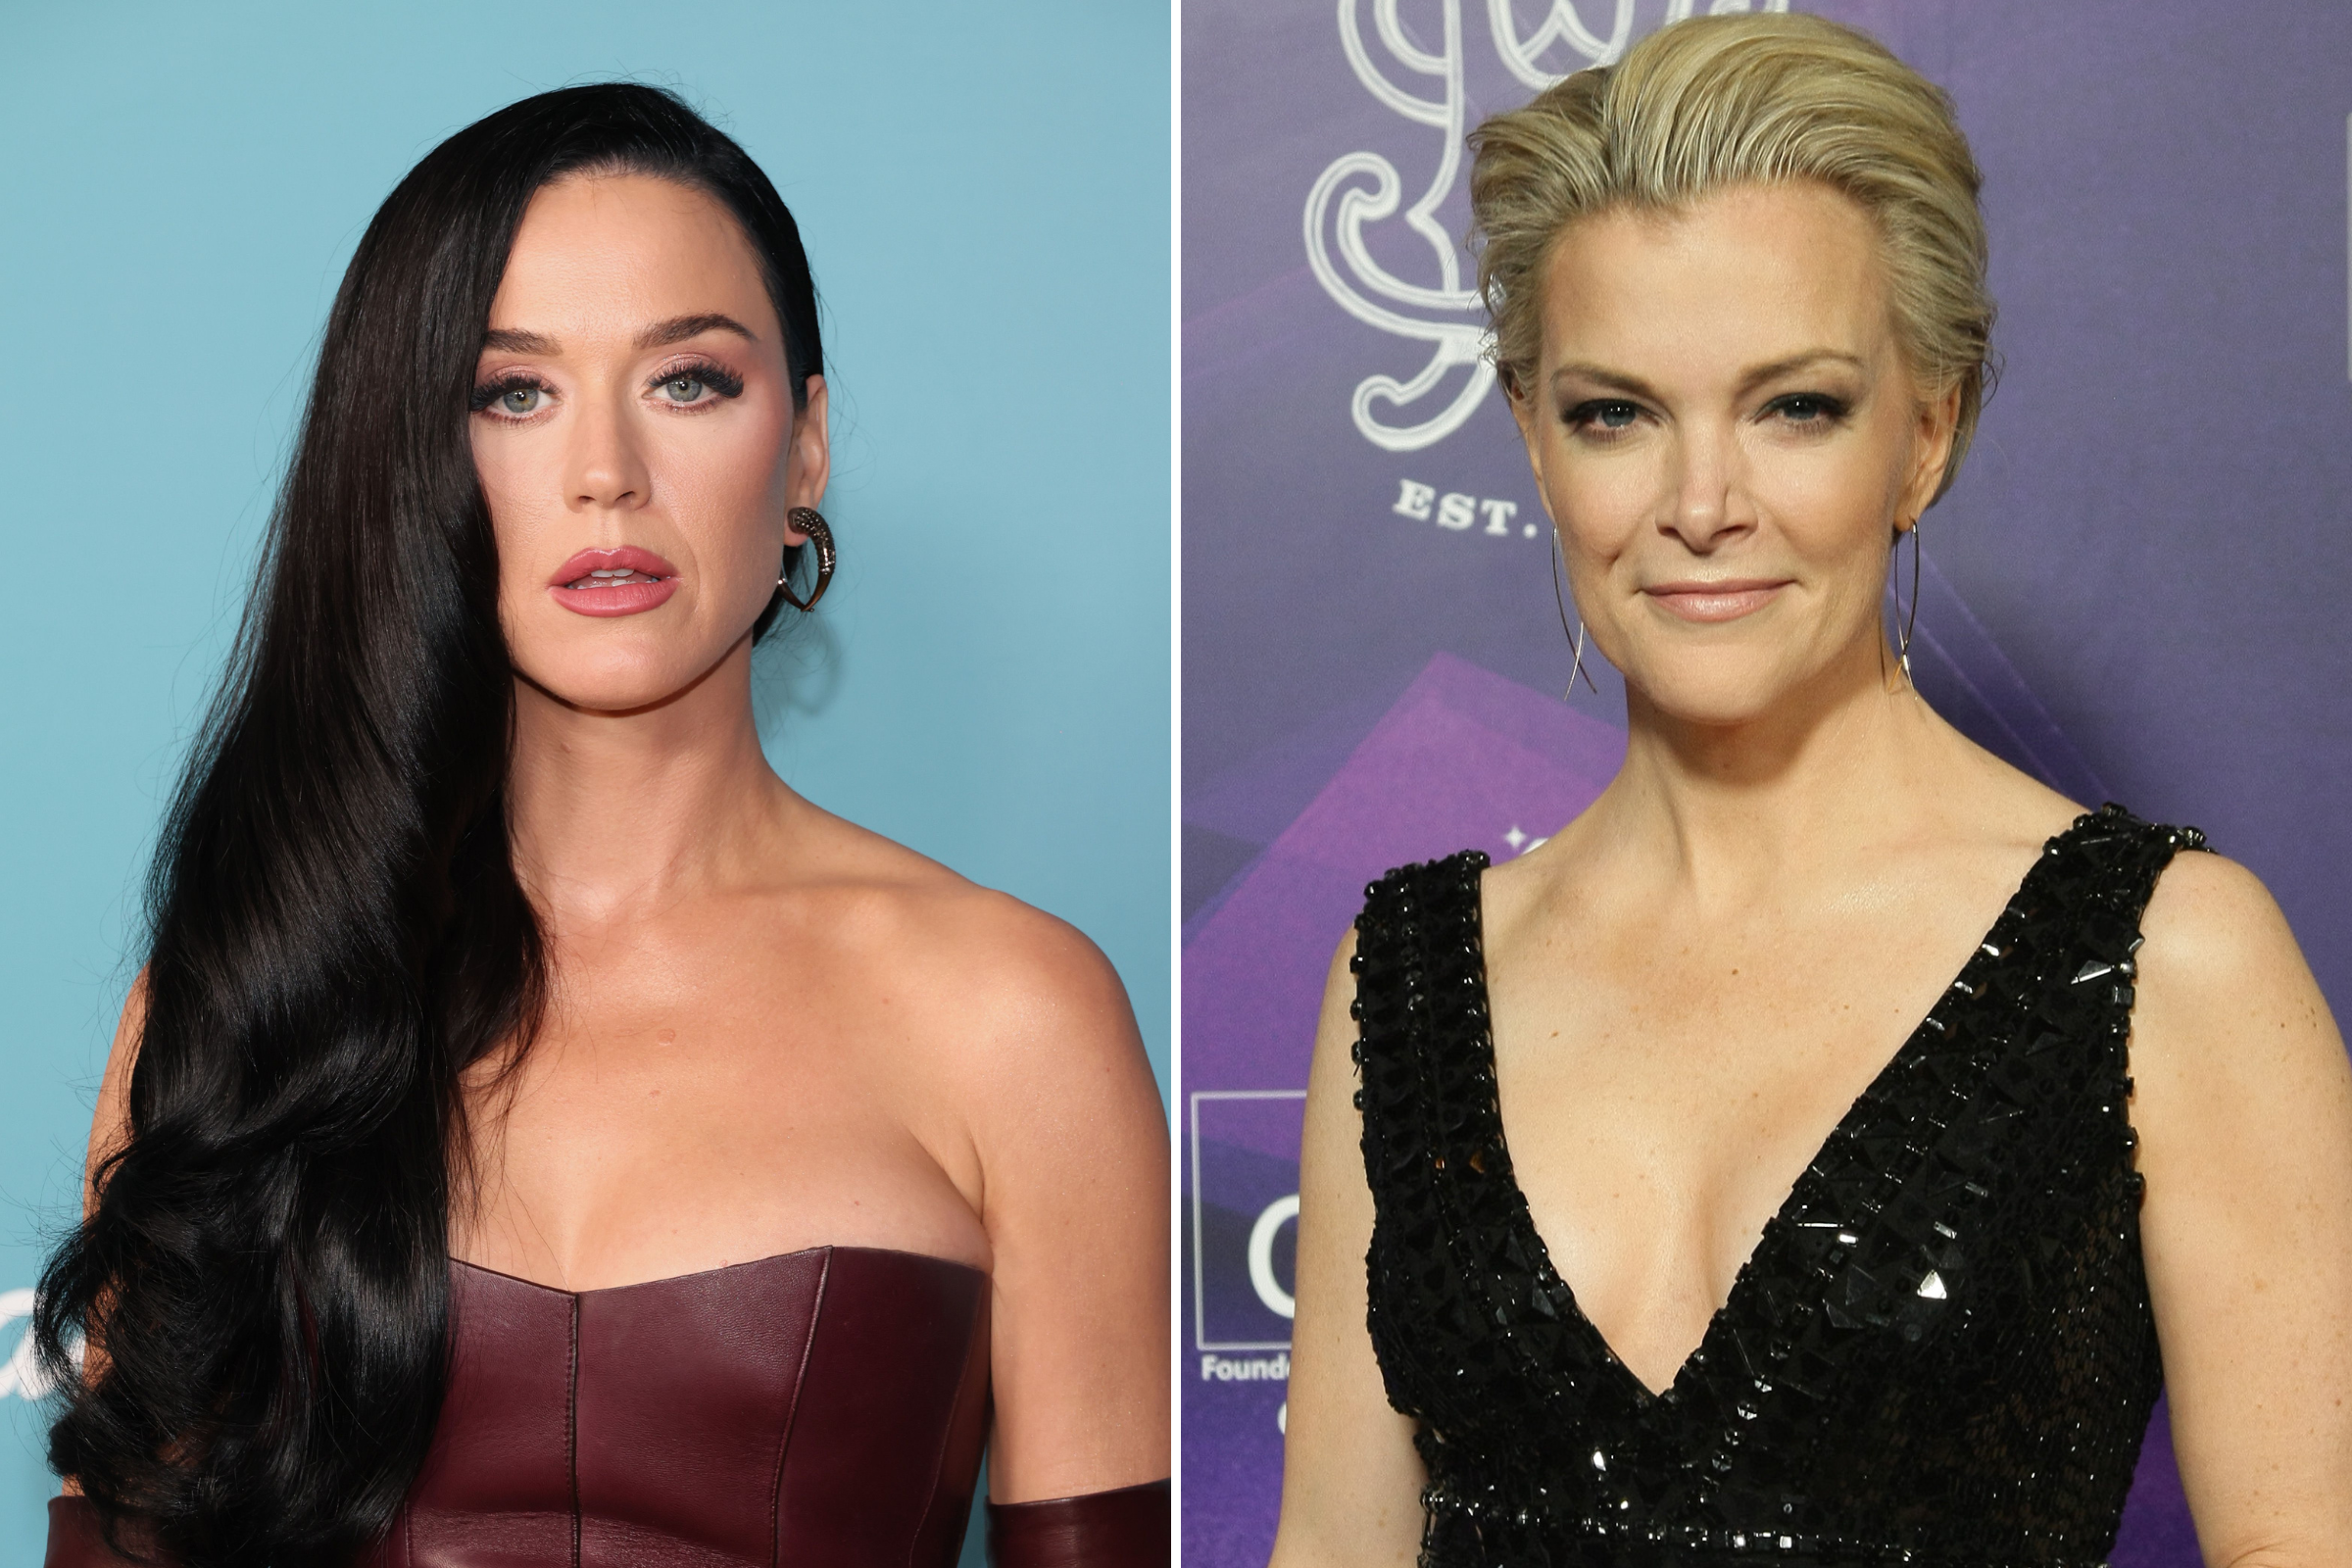 Katy Perry branded "petty" by Megyn Kelly over edited Instagram post